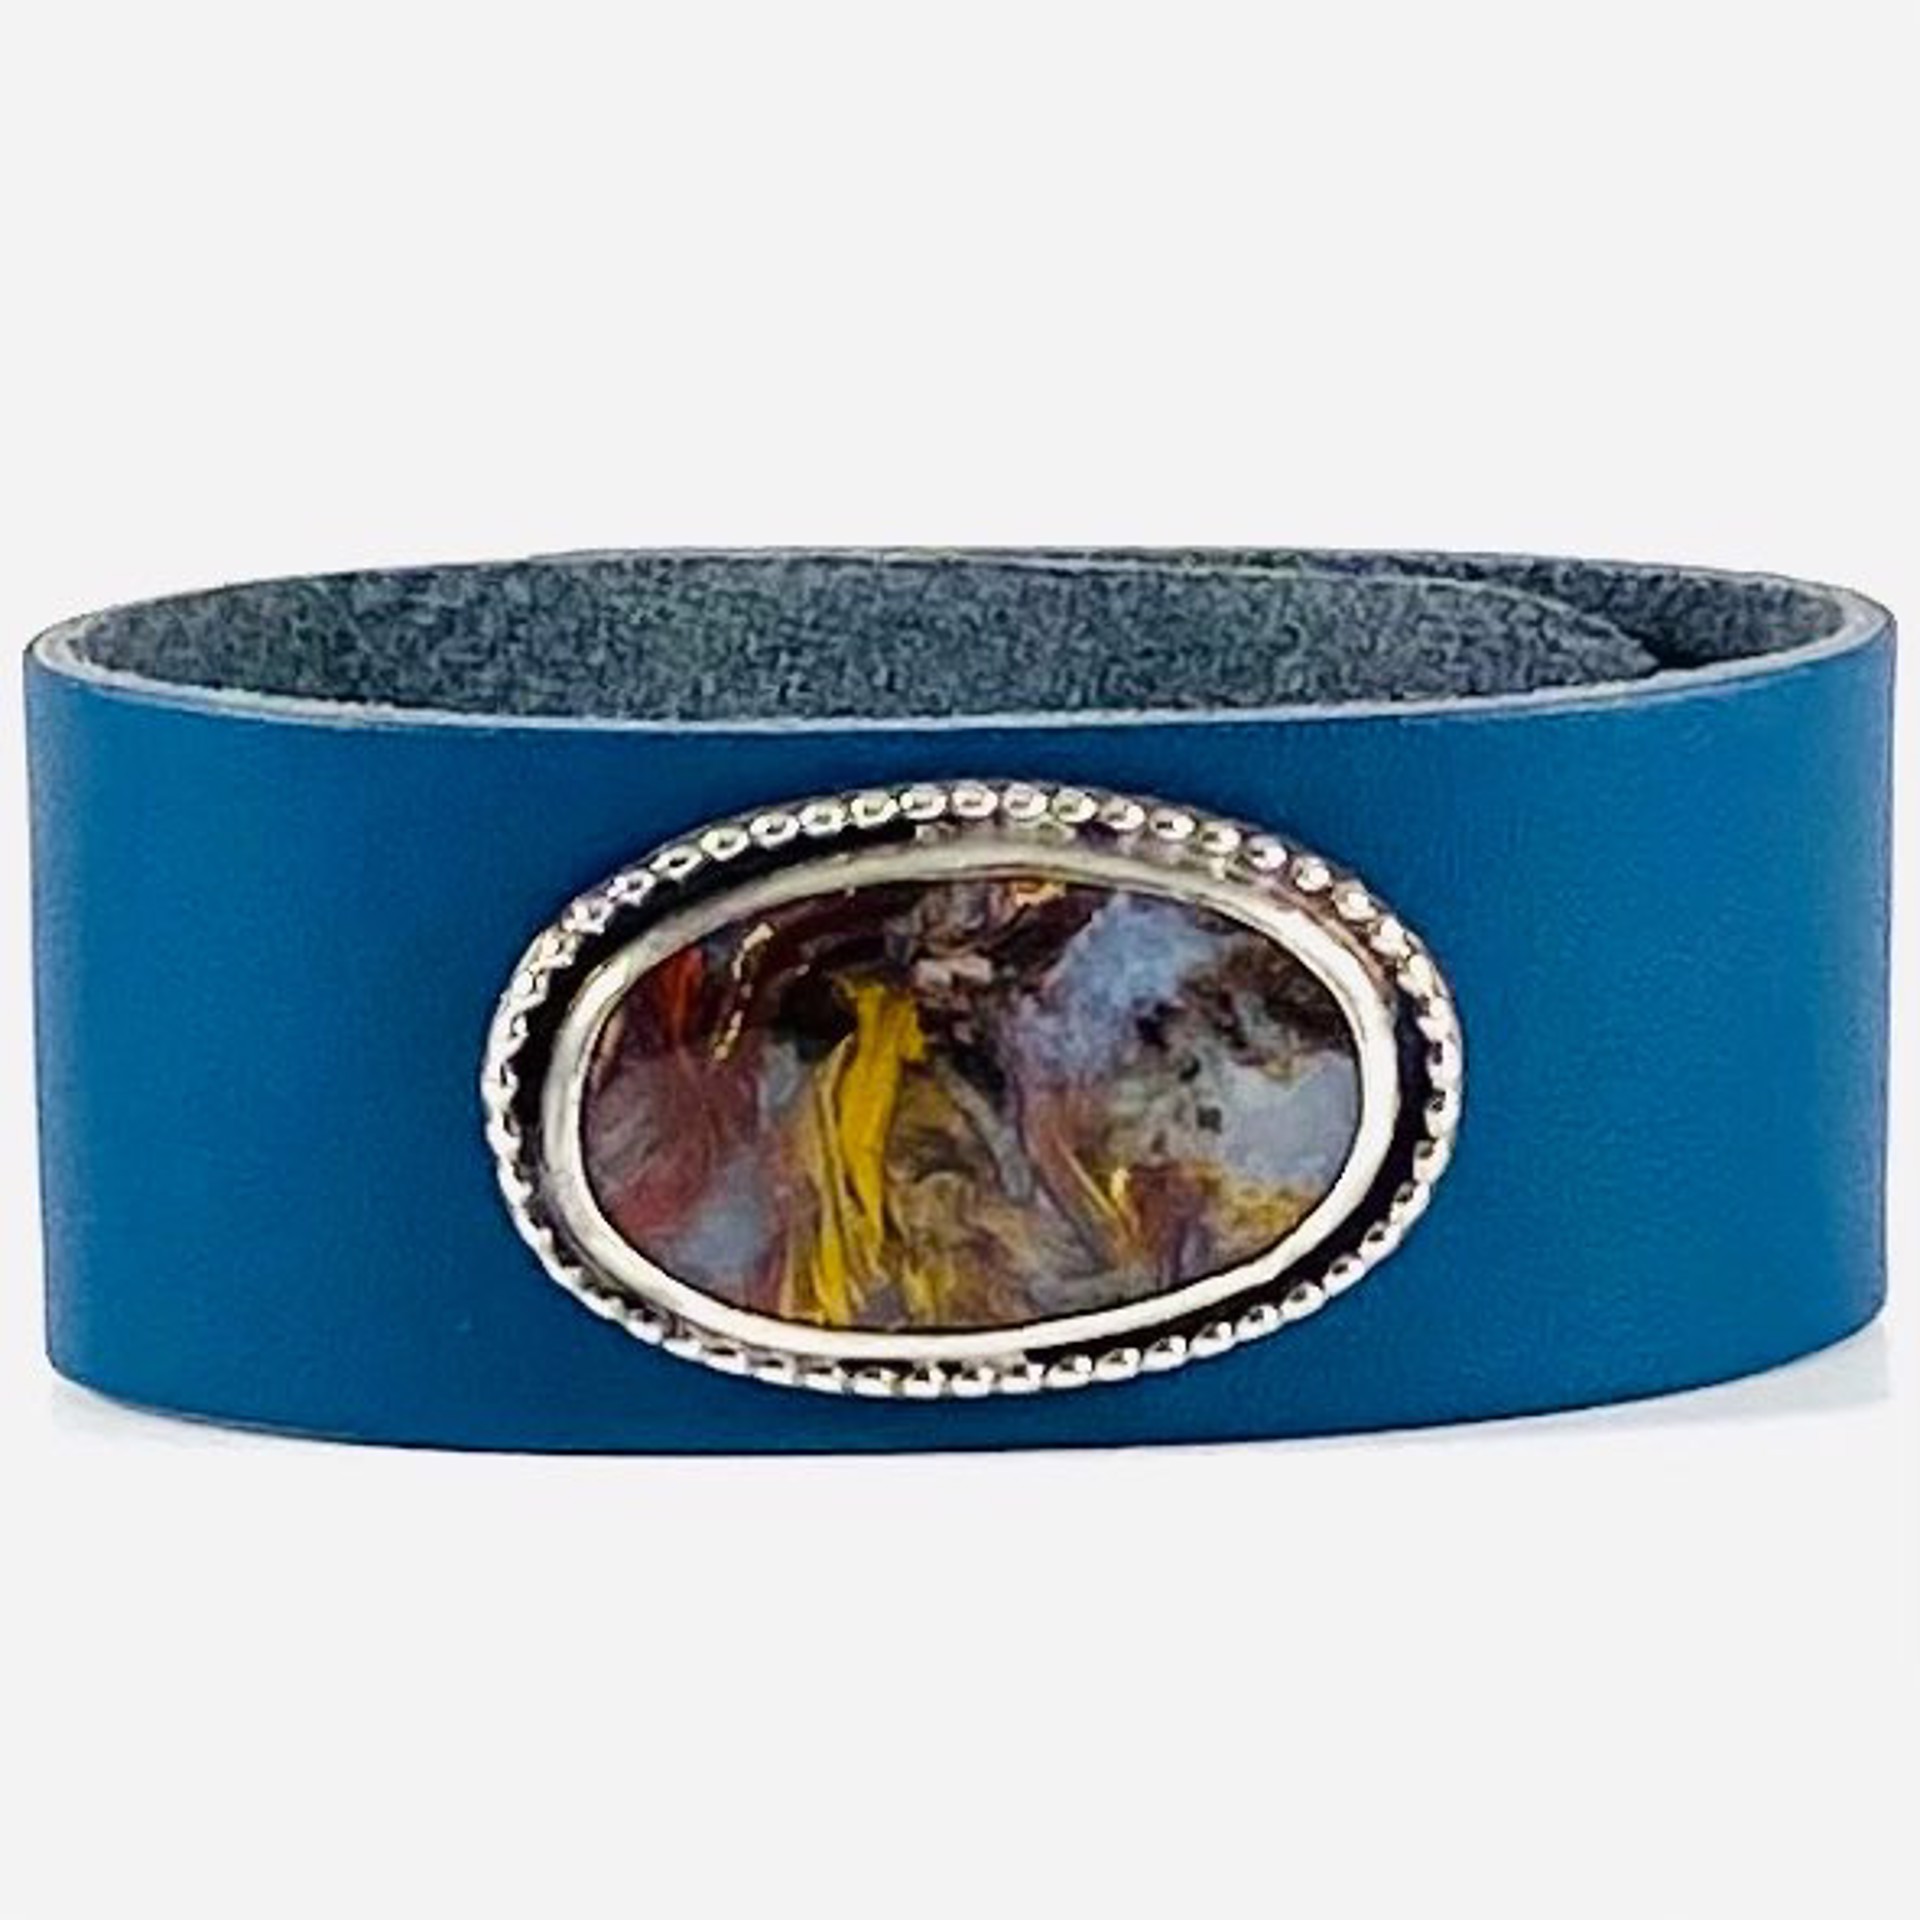 Oval Seam Agate with Bead Accent on Dark Blue Leather Bracelet AB222-66 by Anne Bivens